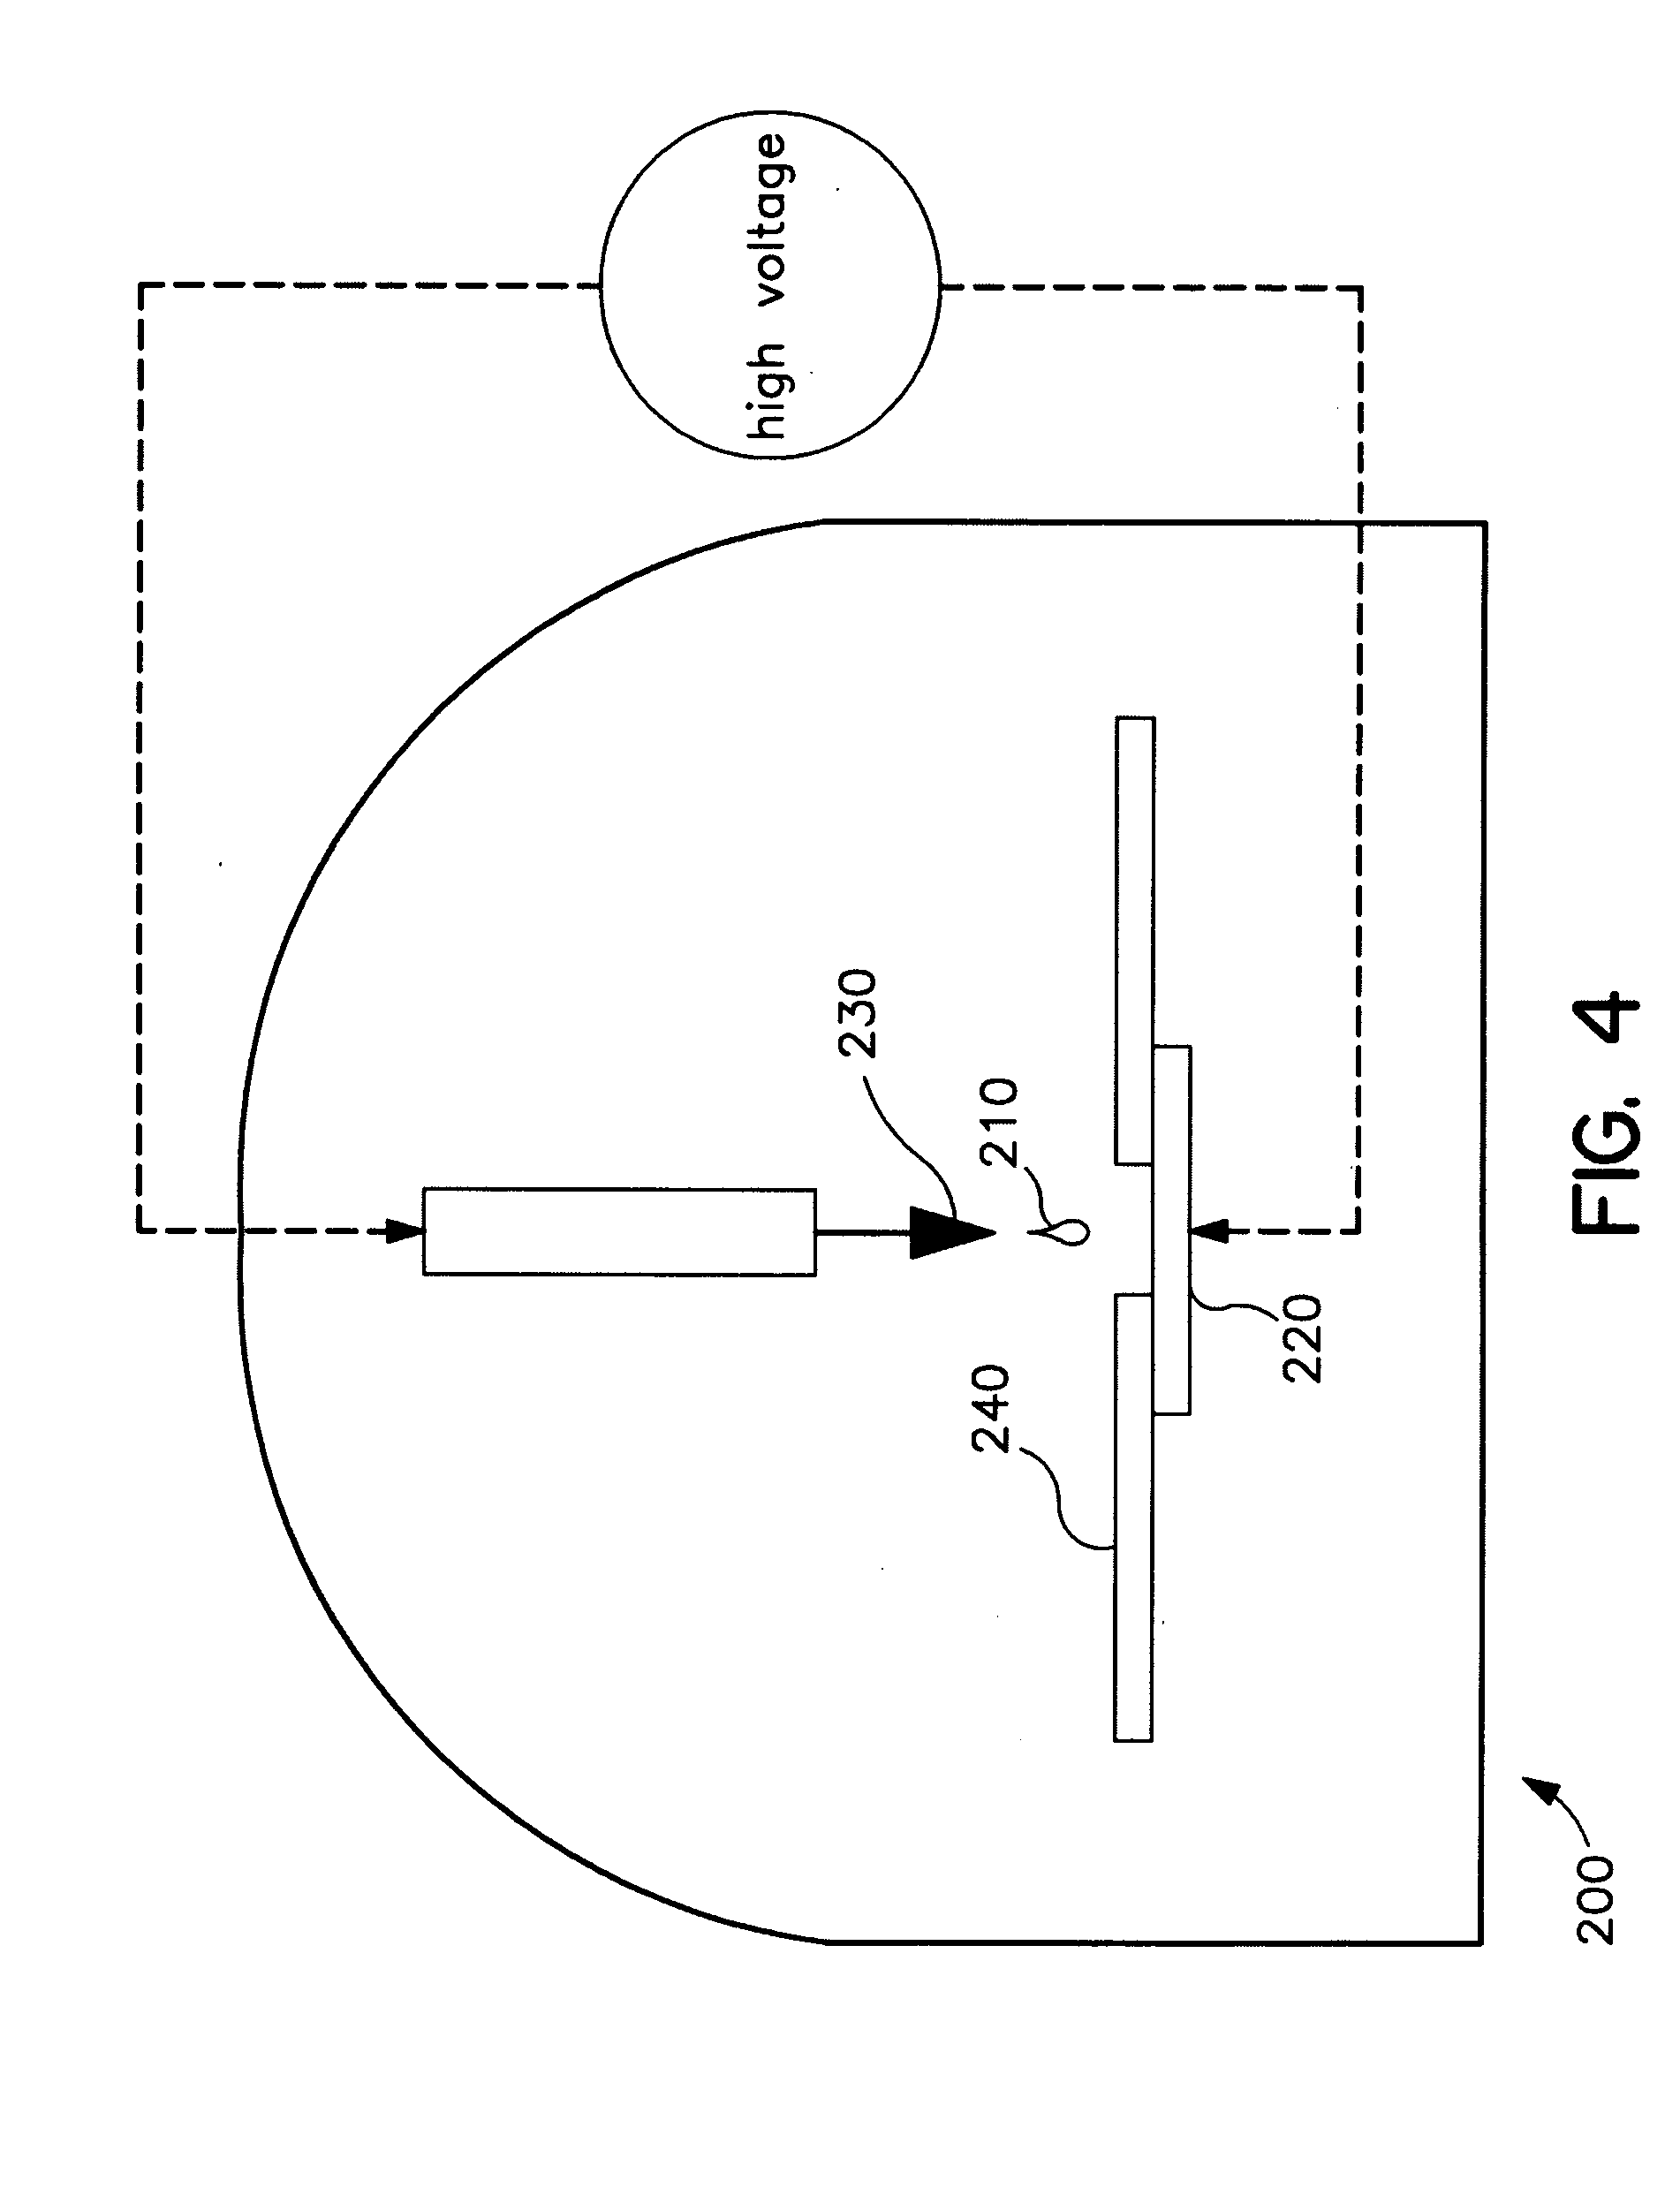 Methods for using Raman spectroscopy to obtain a protein profile of a biological sample